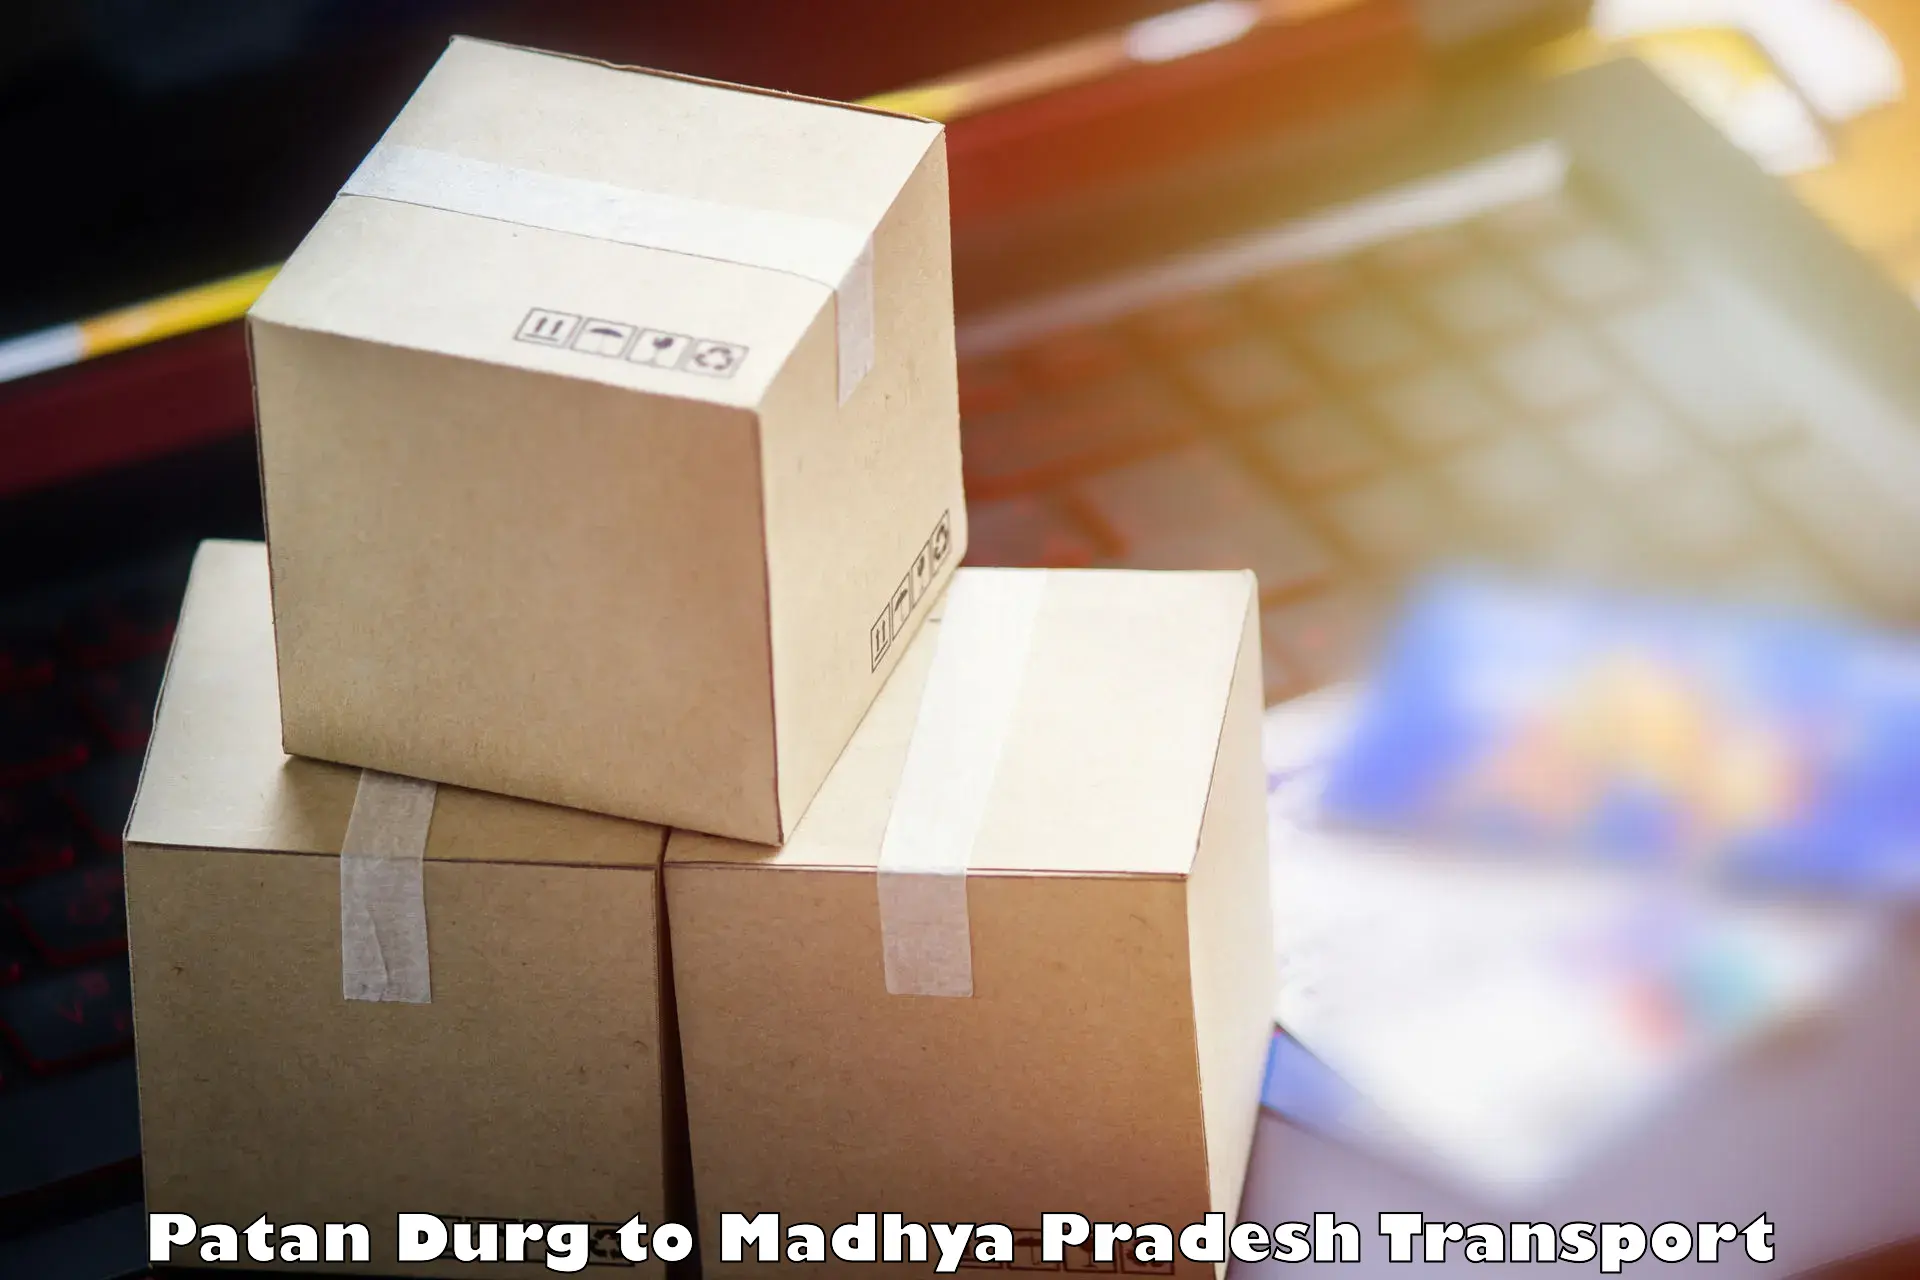 Goods delivery service Patan Durg to Chhindwara